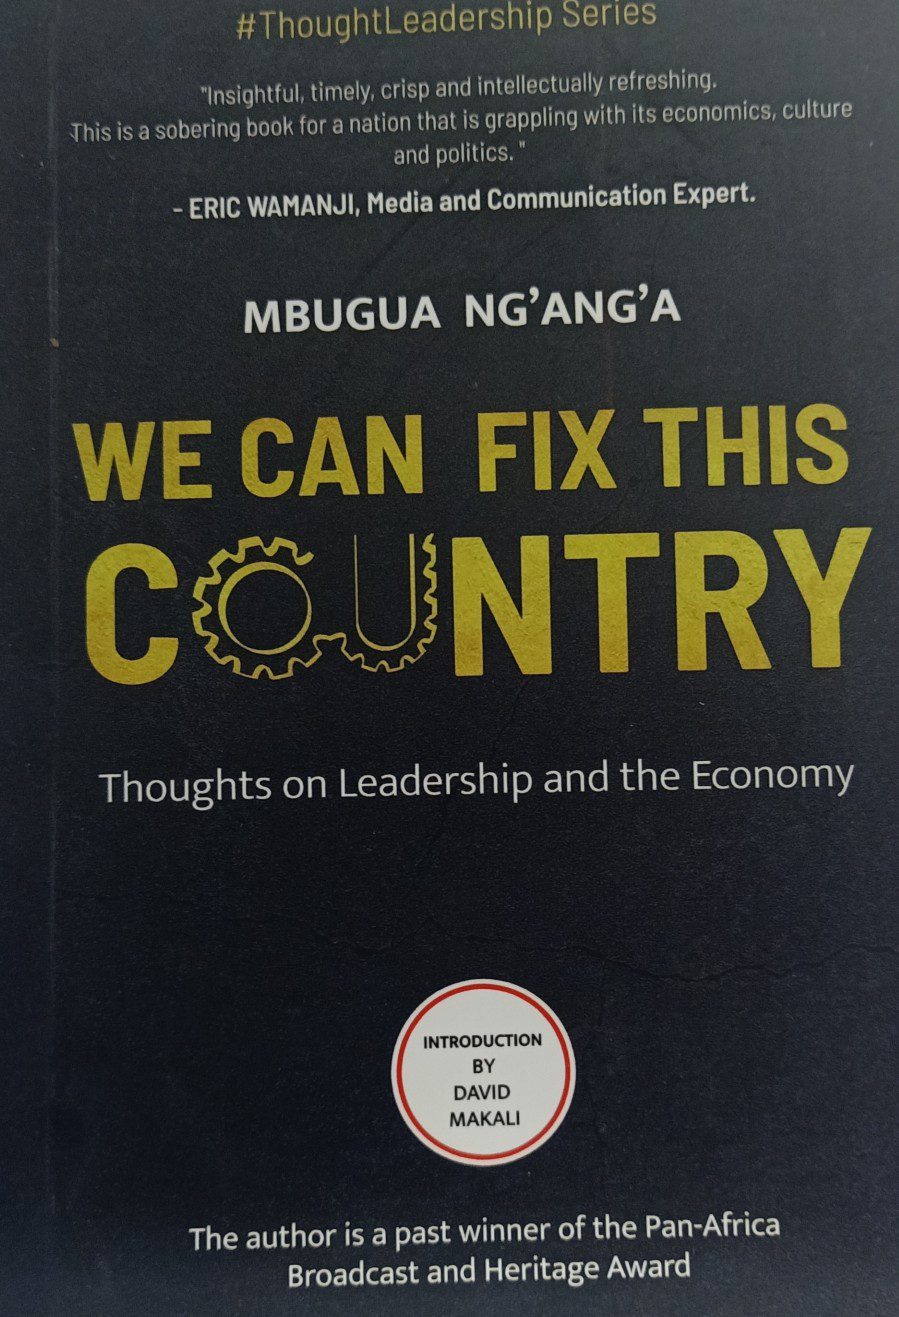 We can fix this country Thought on leadership and the economy by Nganga Mbugua